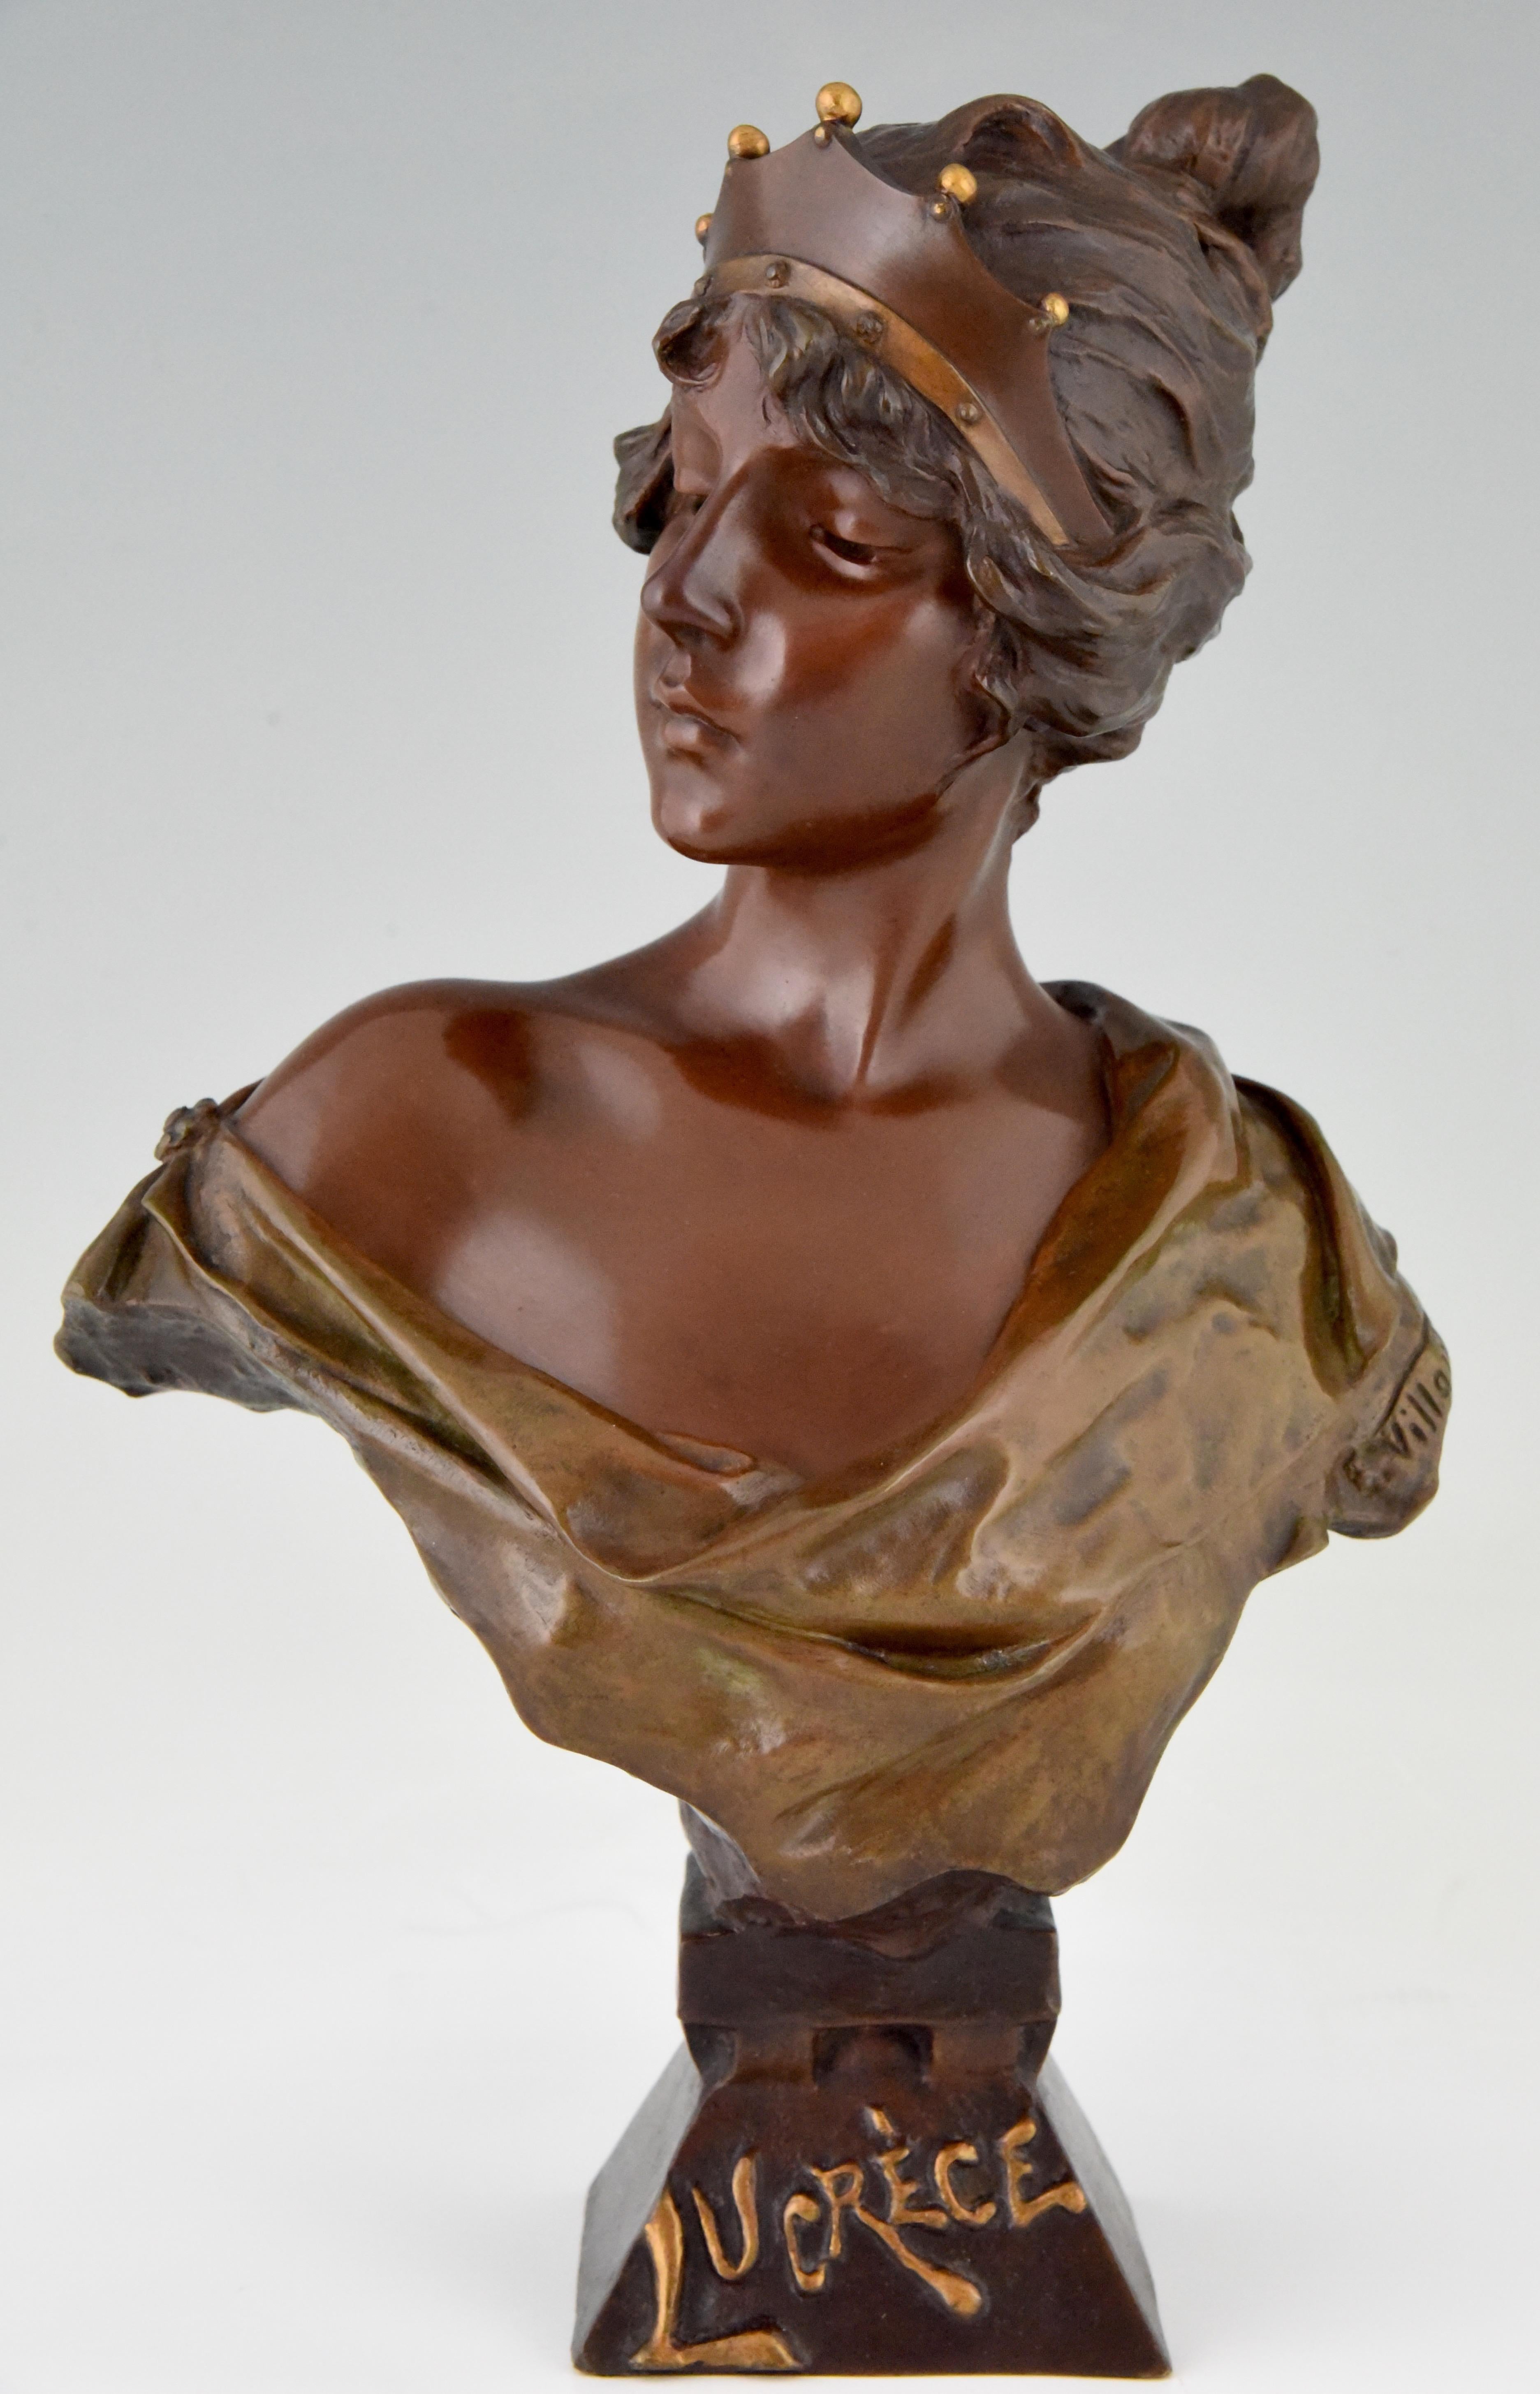 Beautiful Art Nouveau bronze bust of a lady wearing a crown, Lucrèce. The sculpture is signed by Emmanuel Villanis (1858-1914) and has the foundry seal of the Société des bronzes de Paris. Marked J.P. -Initials of the founder- and numbered.
The